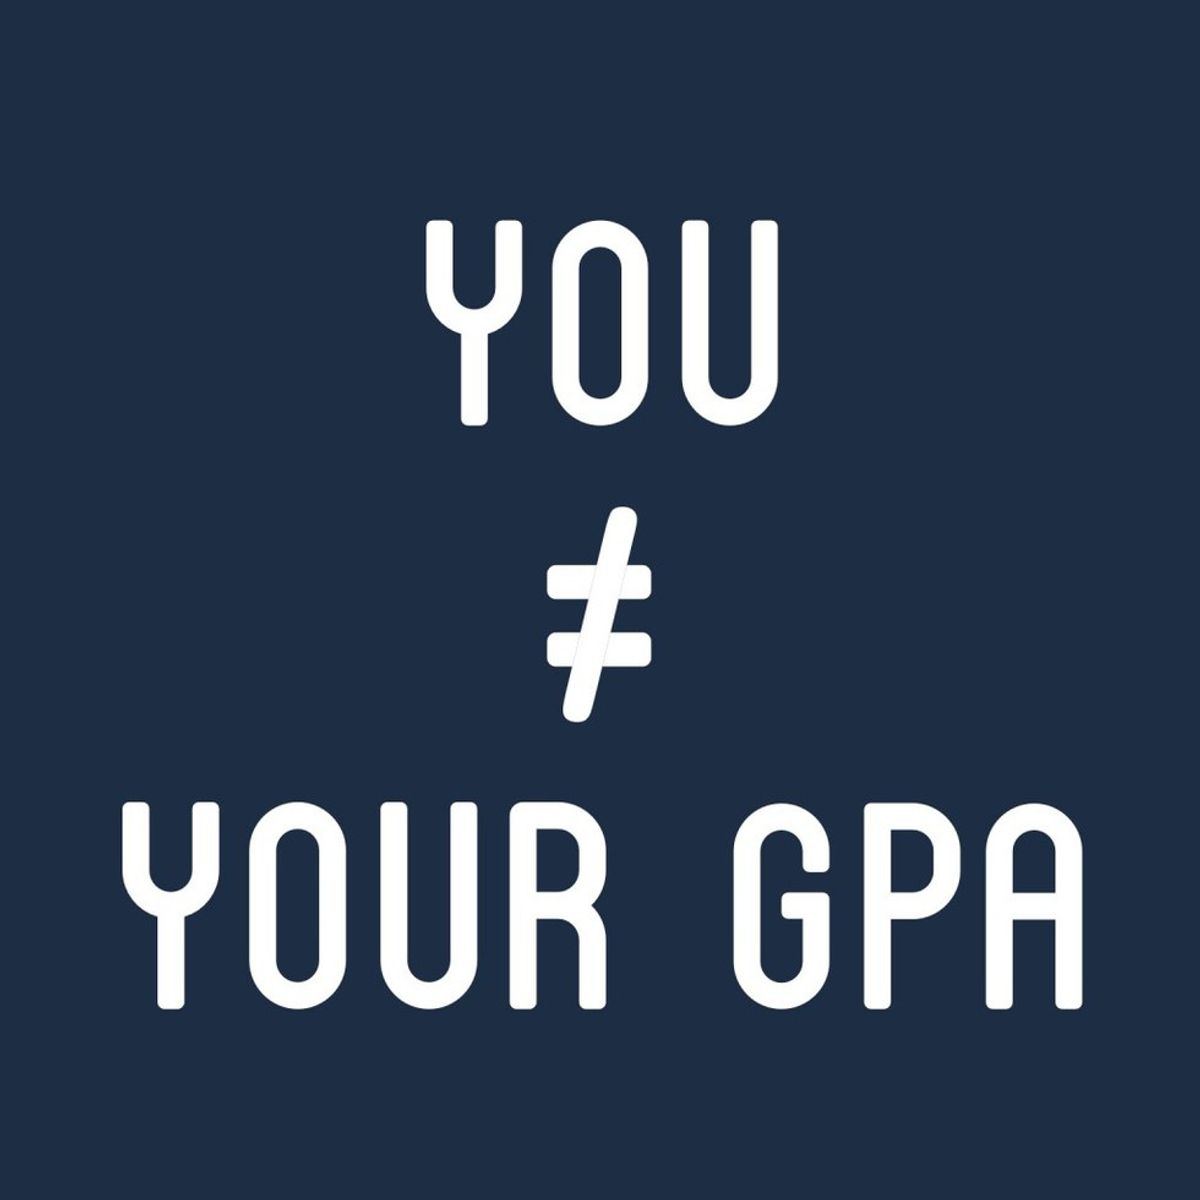 Does GPA really matter after college?